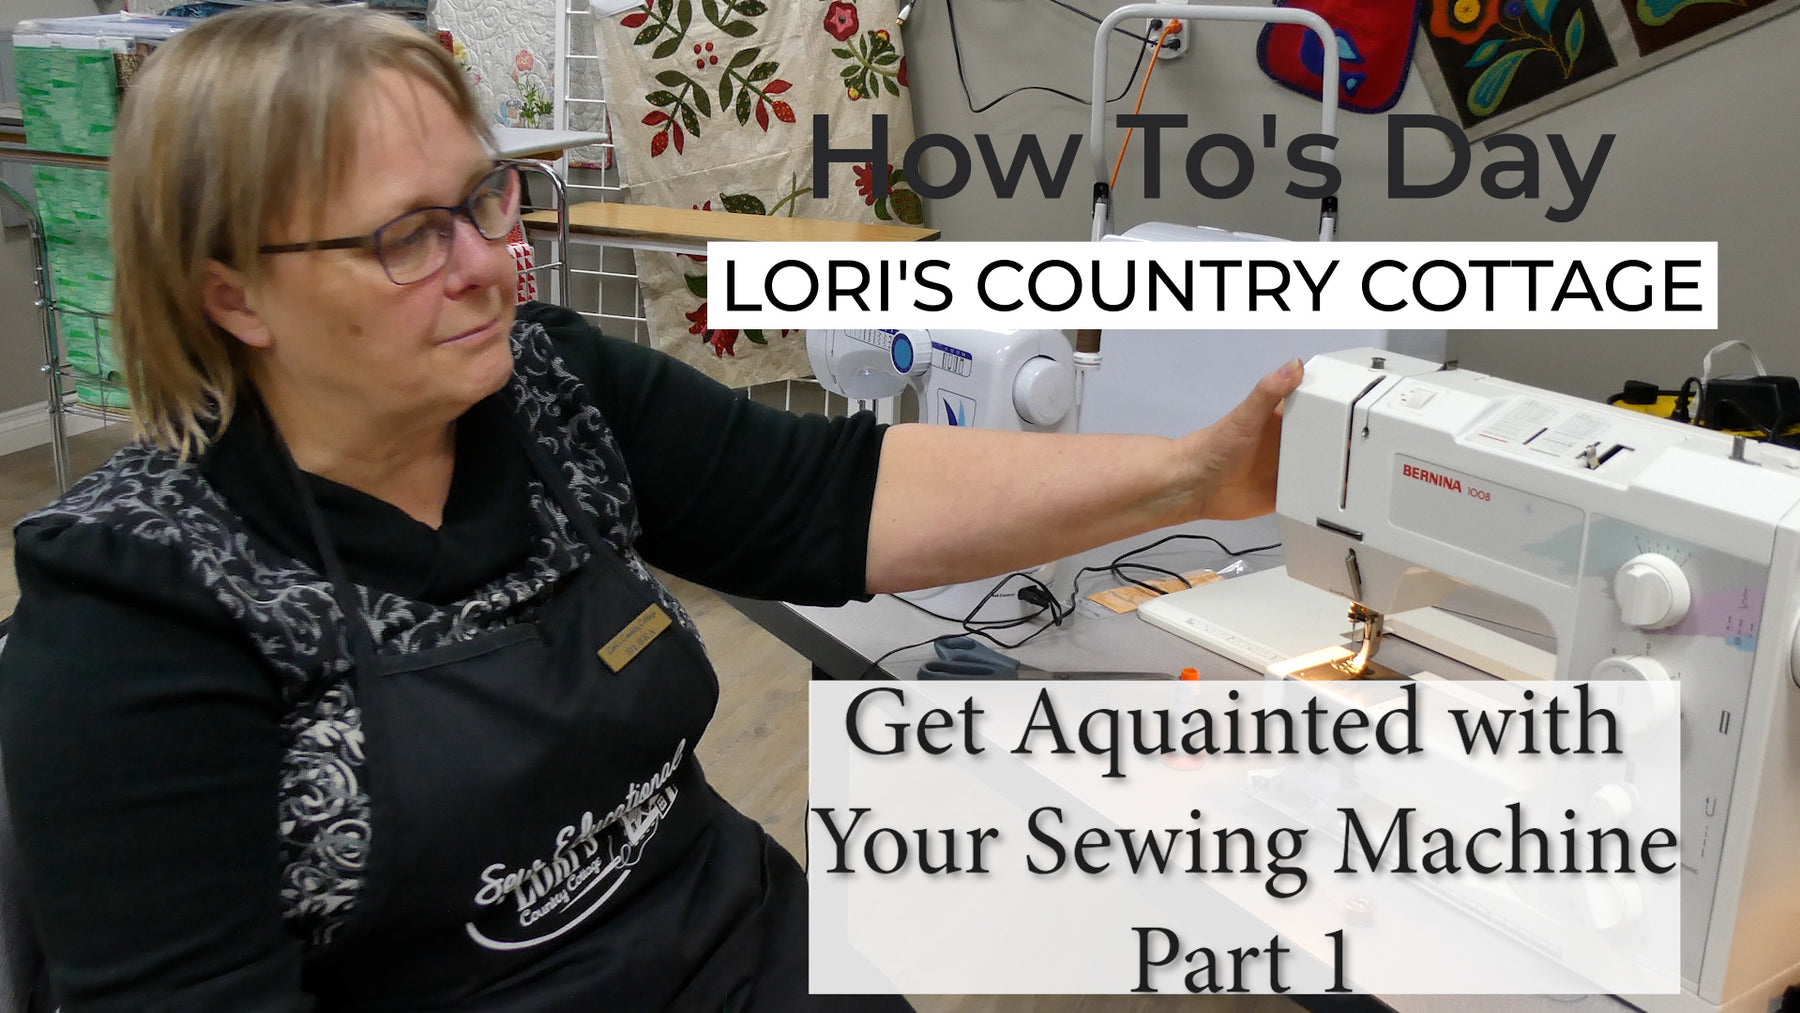 Get Aquainted With Your Sewing Machine - Part 1